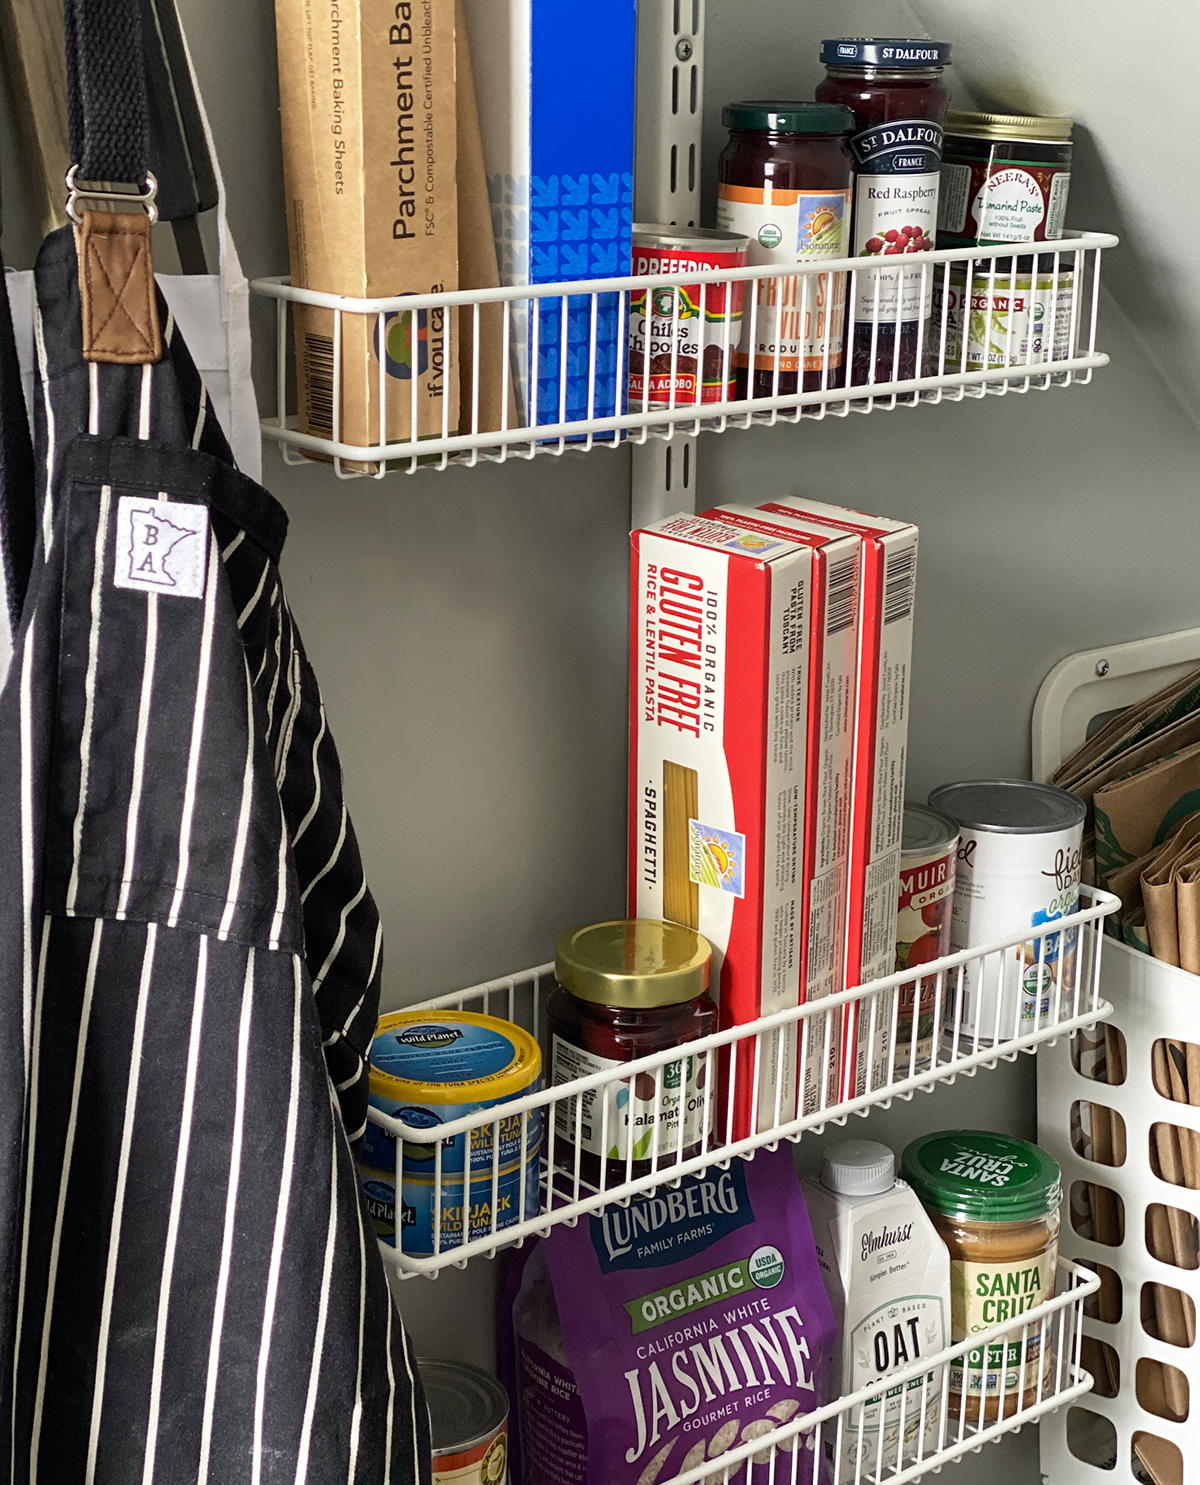 Aprons hanging next to white wire pantry shelves on gray wall with supplies and gluten-free groceries like jam, pasta, rice, and peanut butter. 